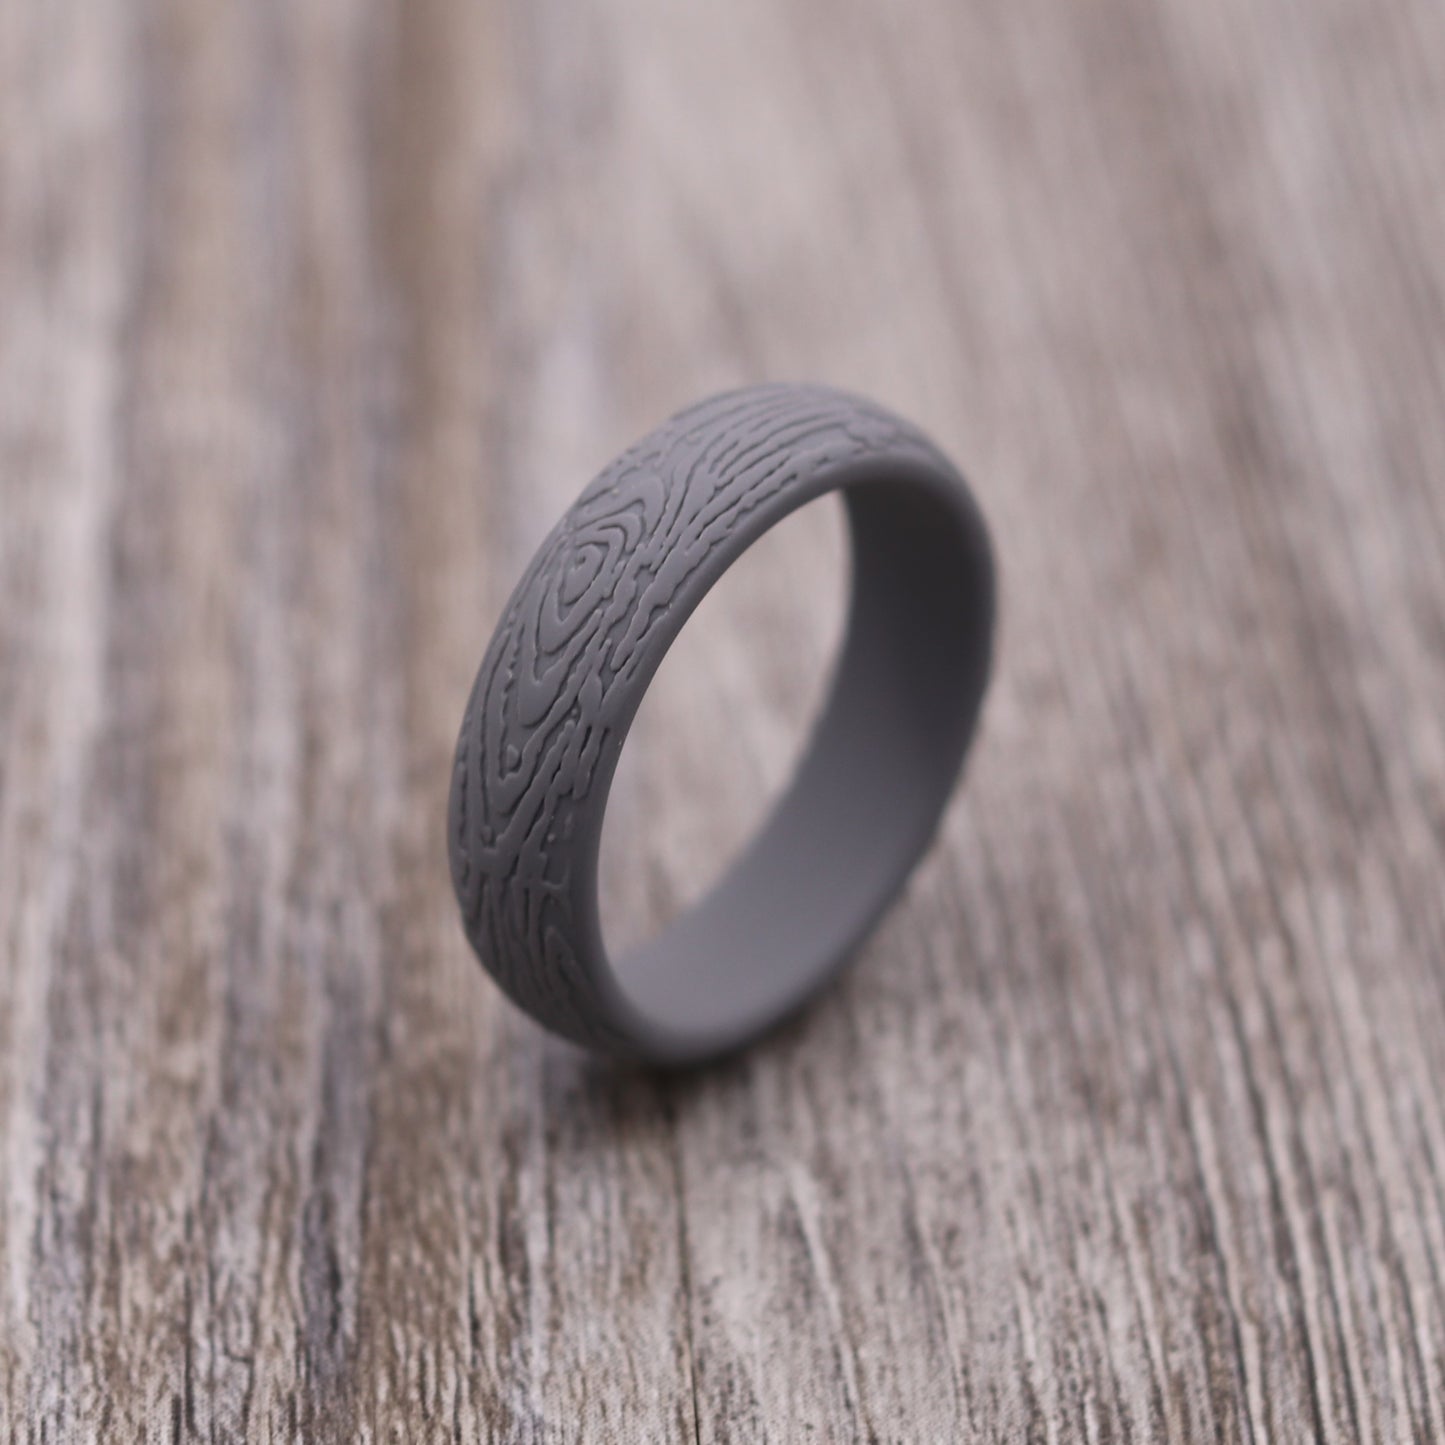 5.7MM Tree Bark Textured Silicone Ring - PERSONALIZED